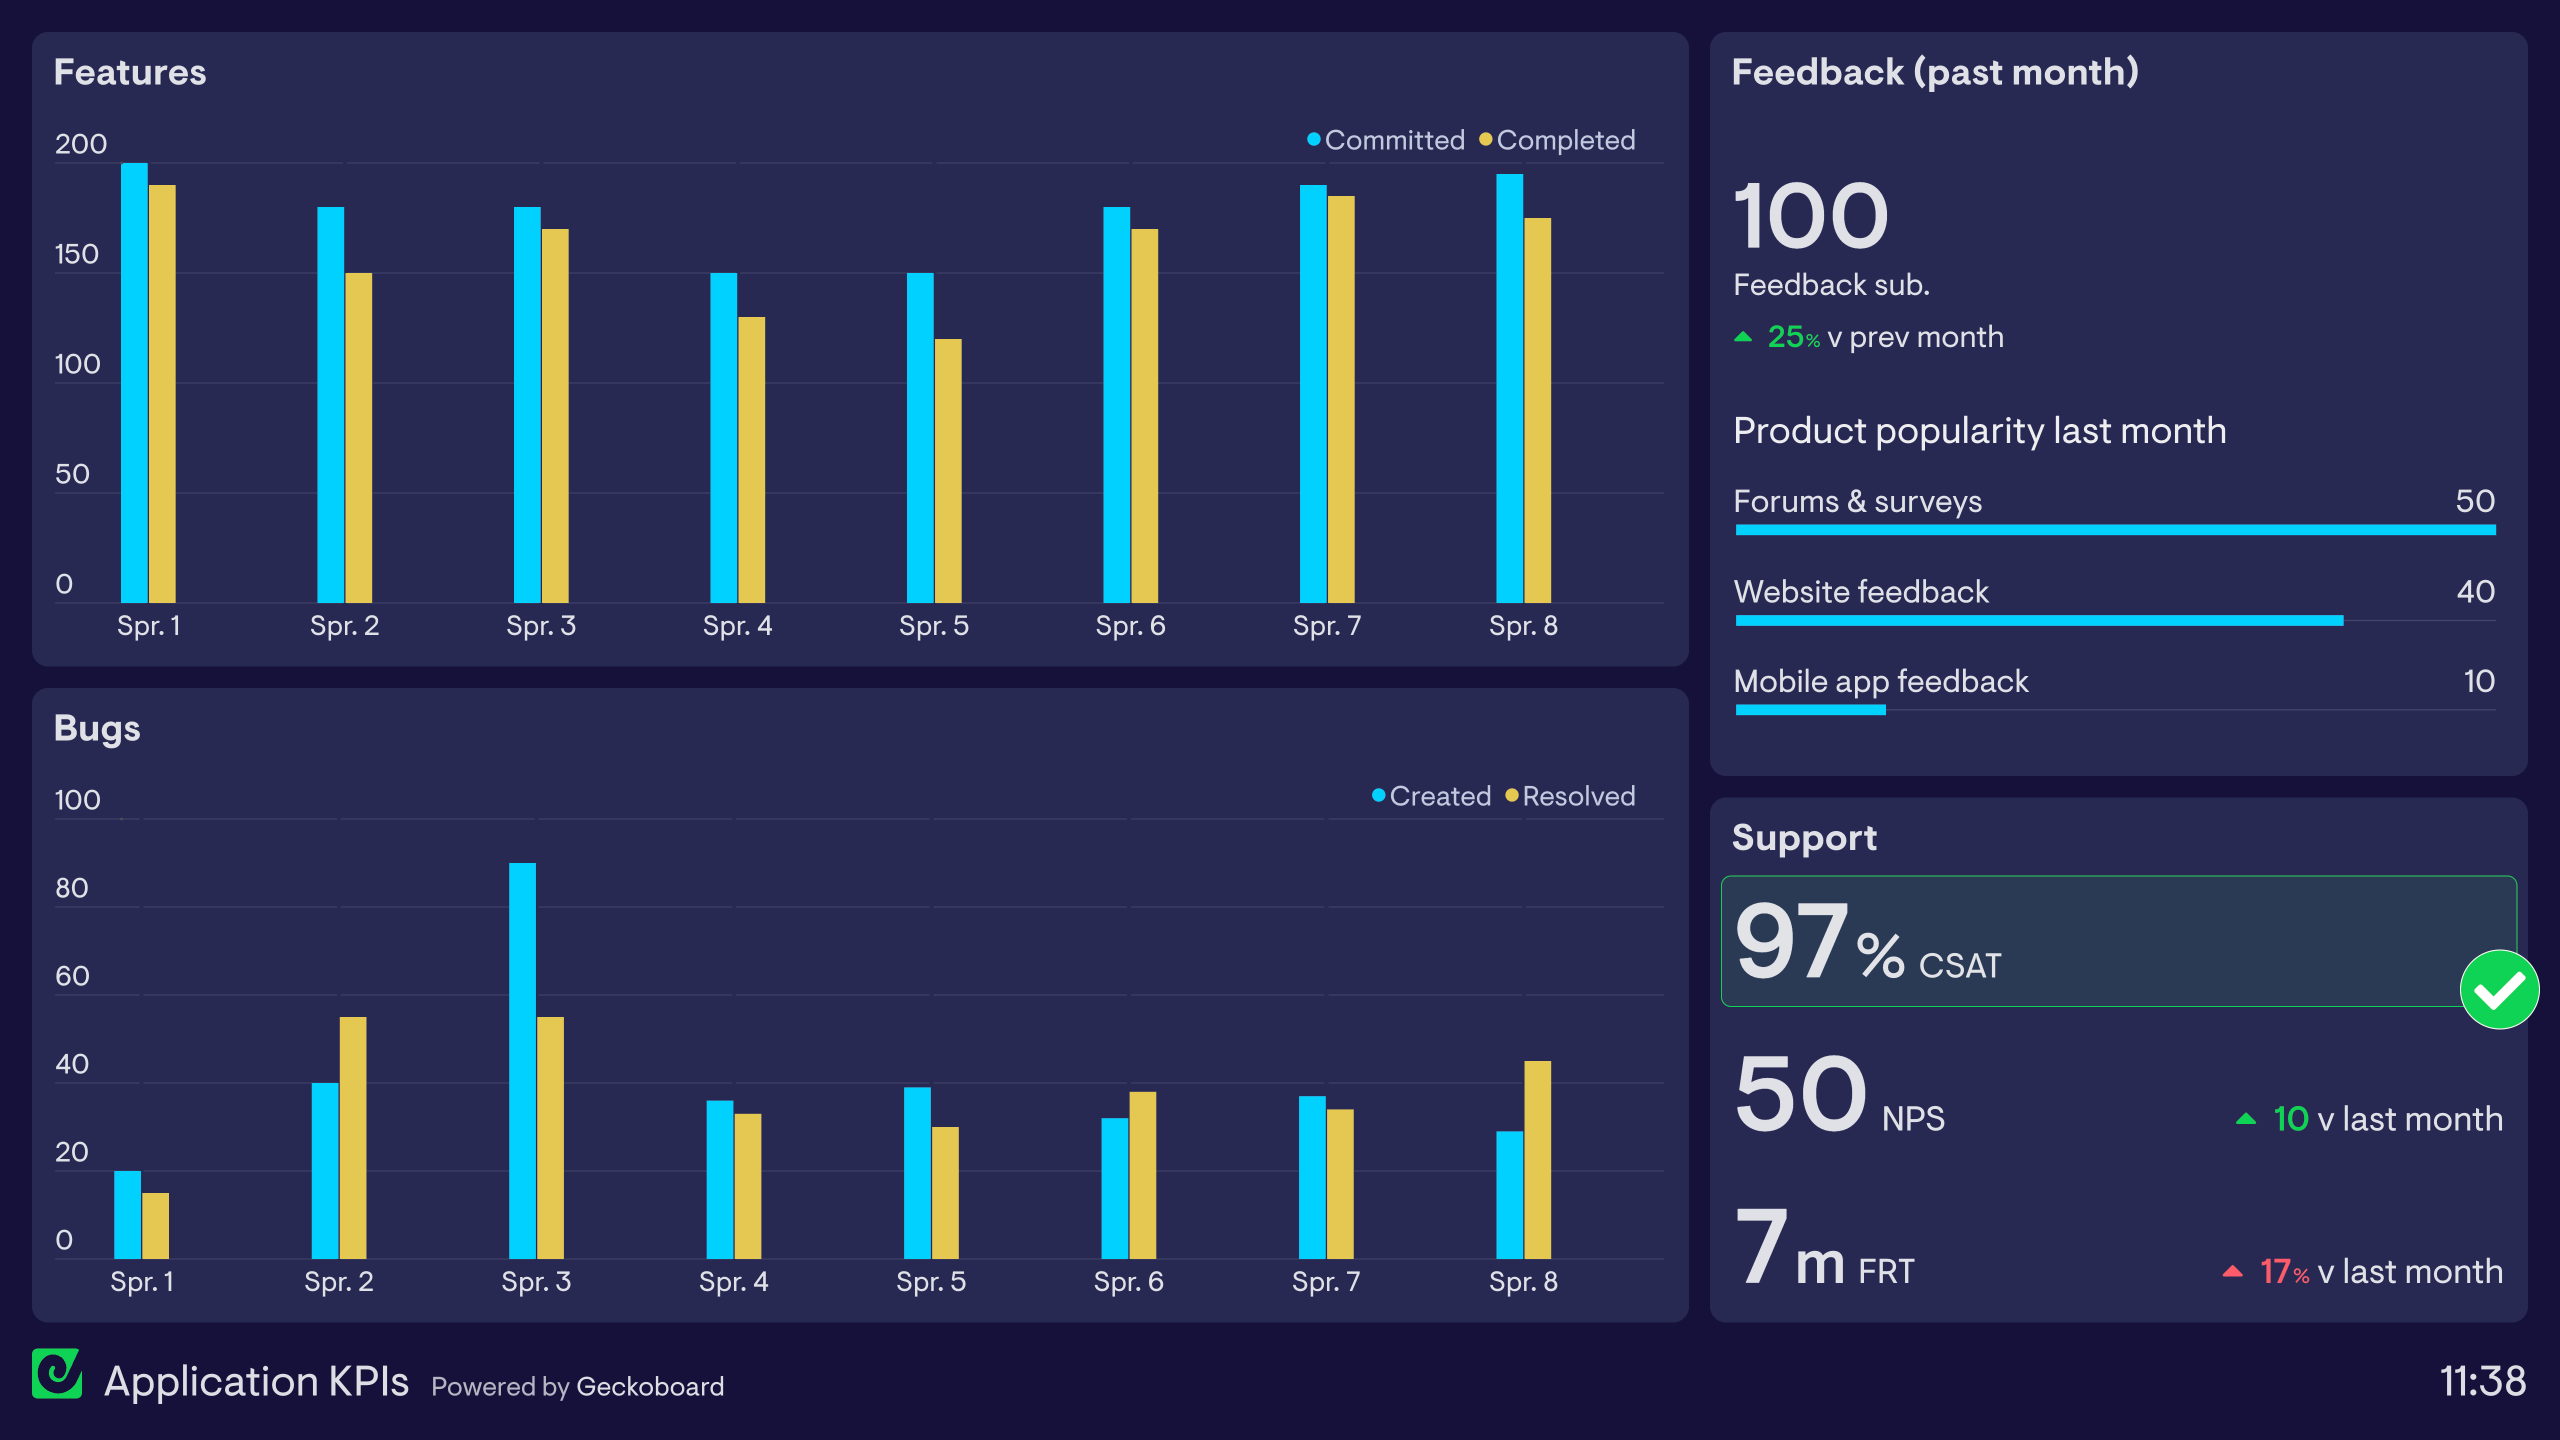 Example of a dashboard used by a product team to monitor application metrics.